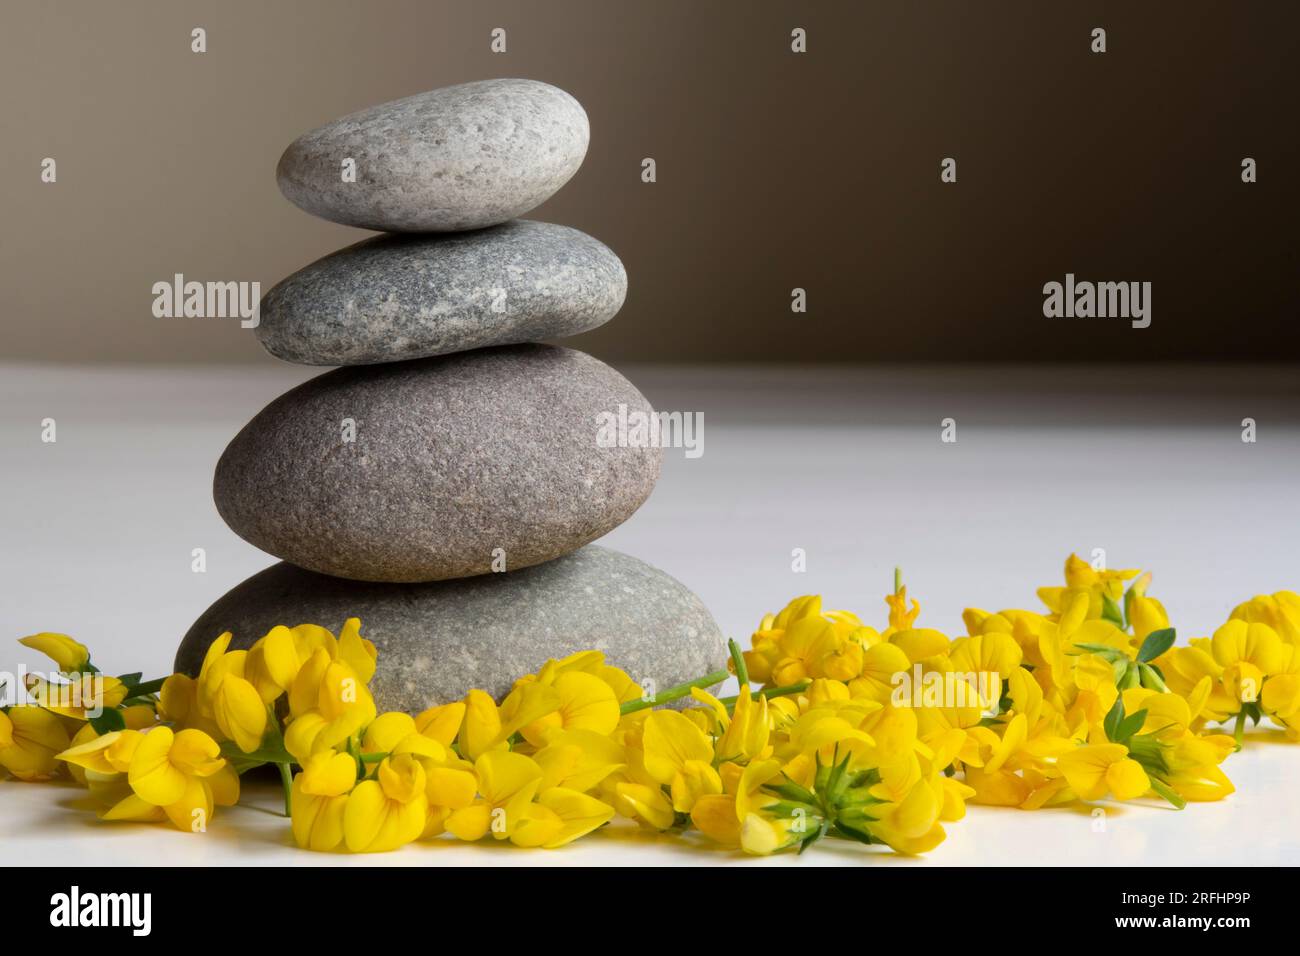 Mindful concept Stock Photo